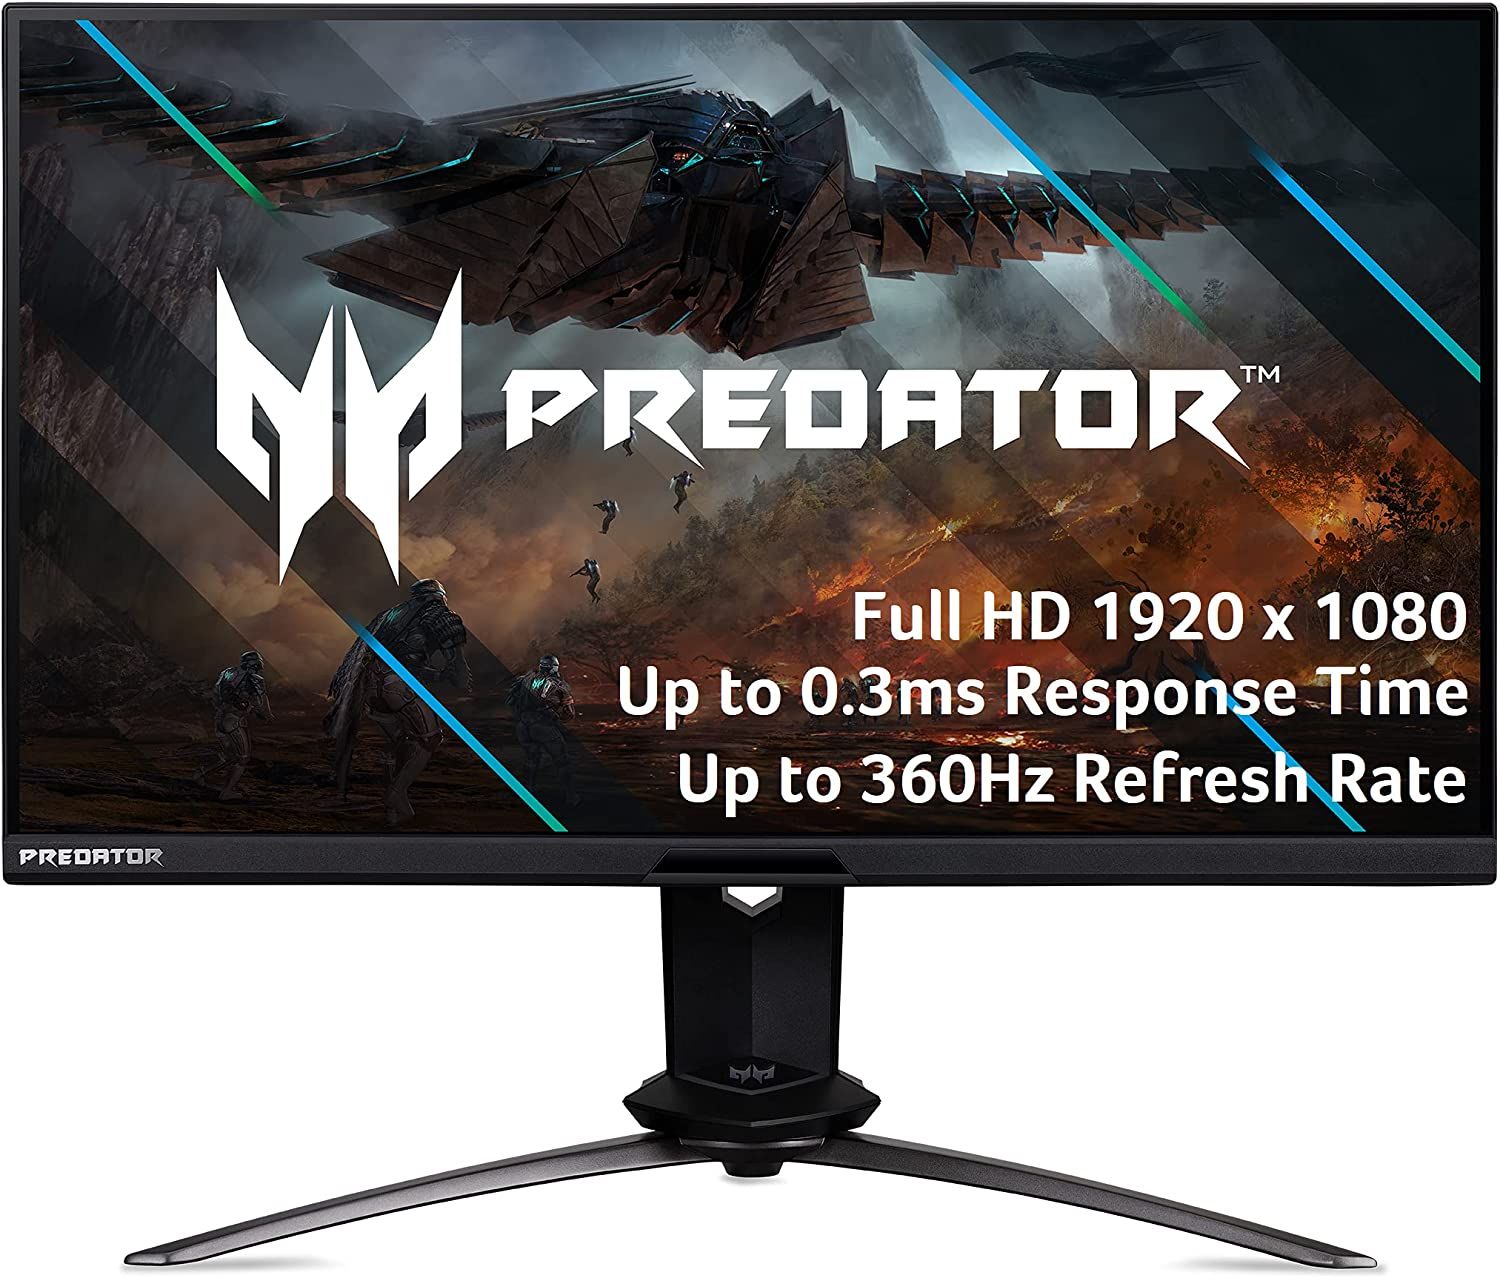 Acer Predator X25 product image of a black monitor with white Acer branding on the display.